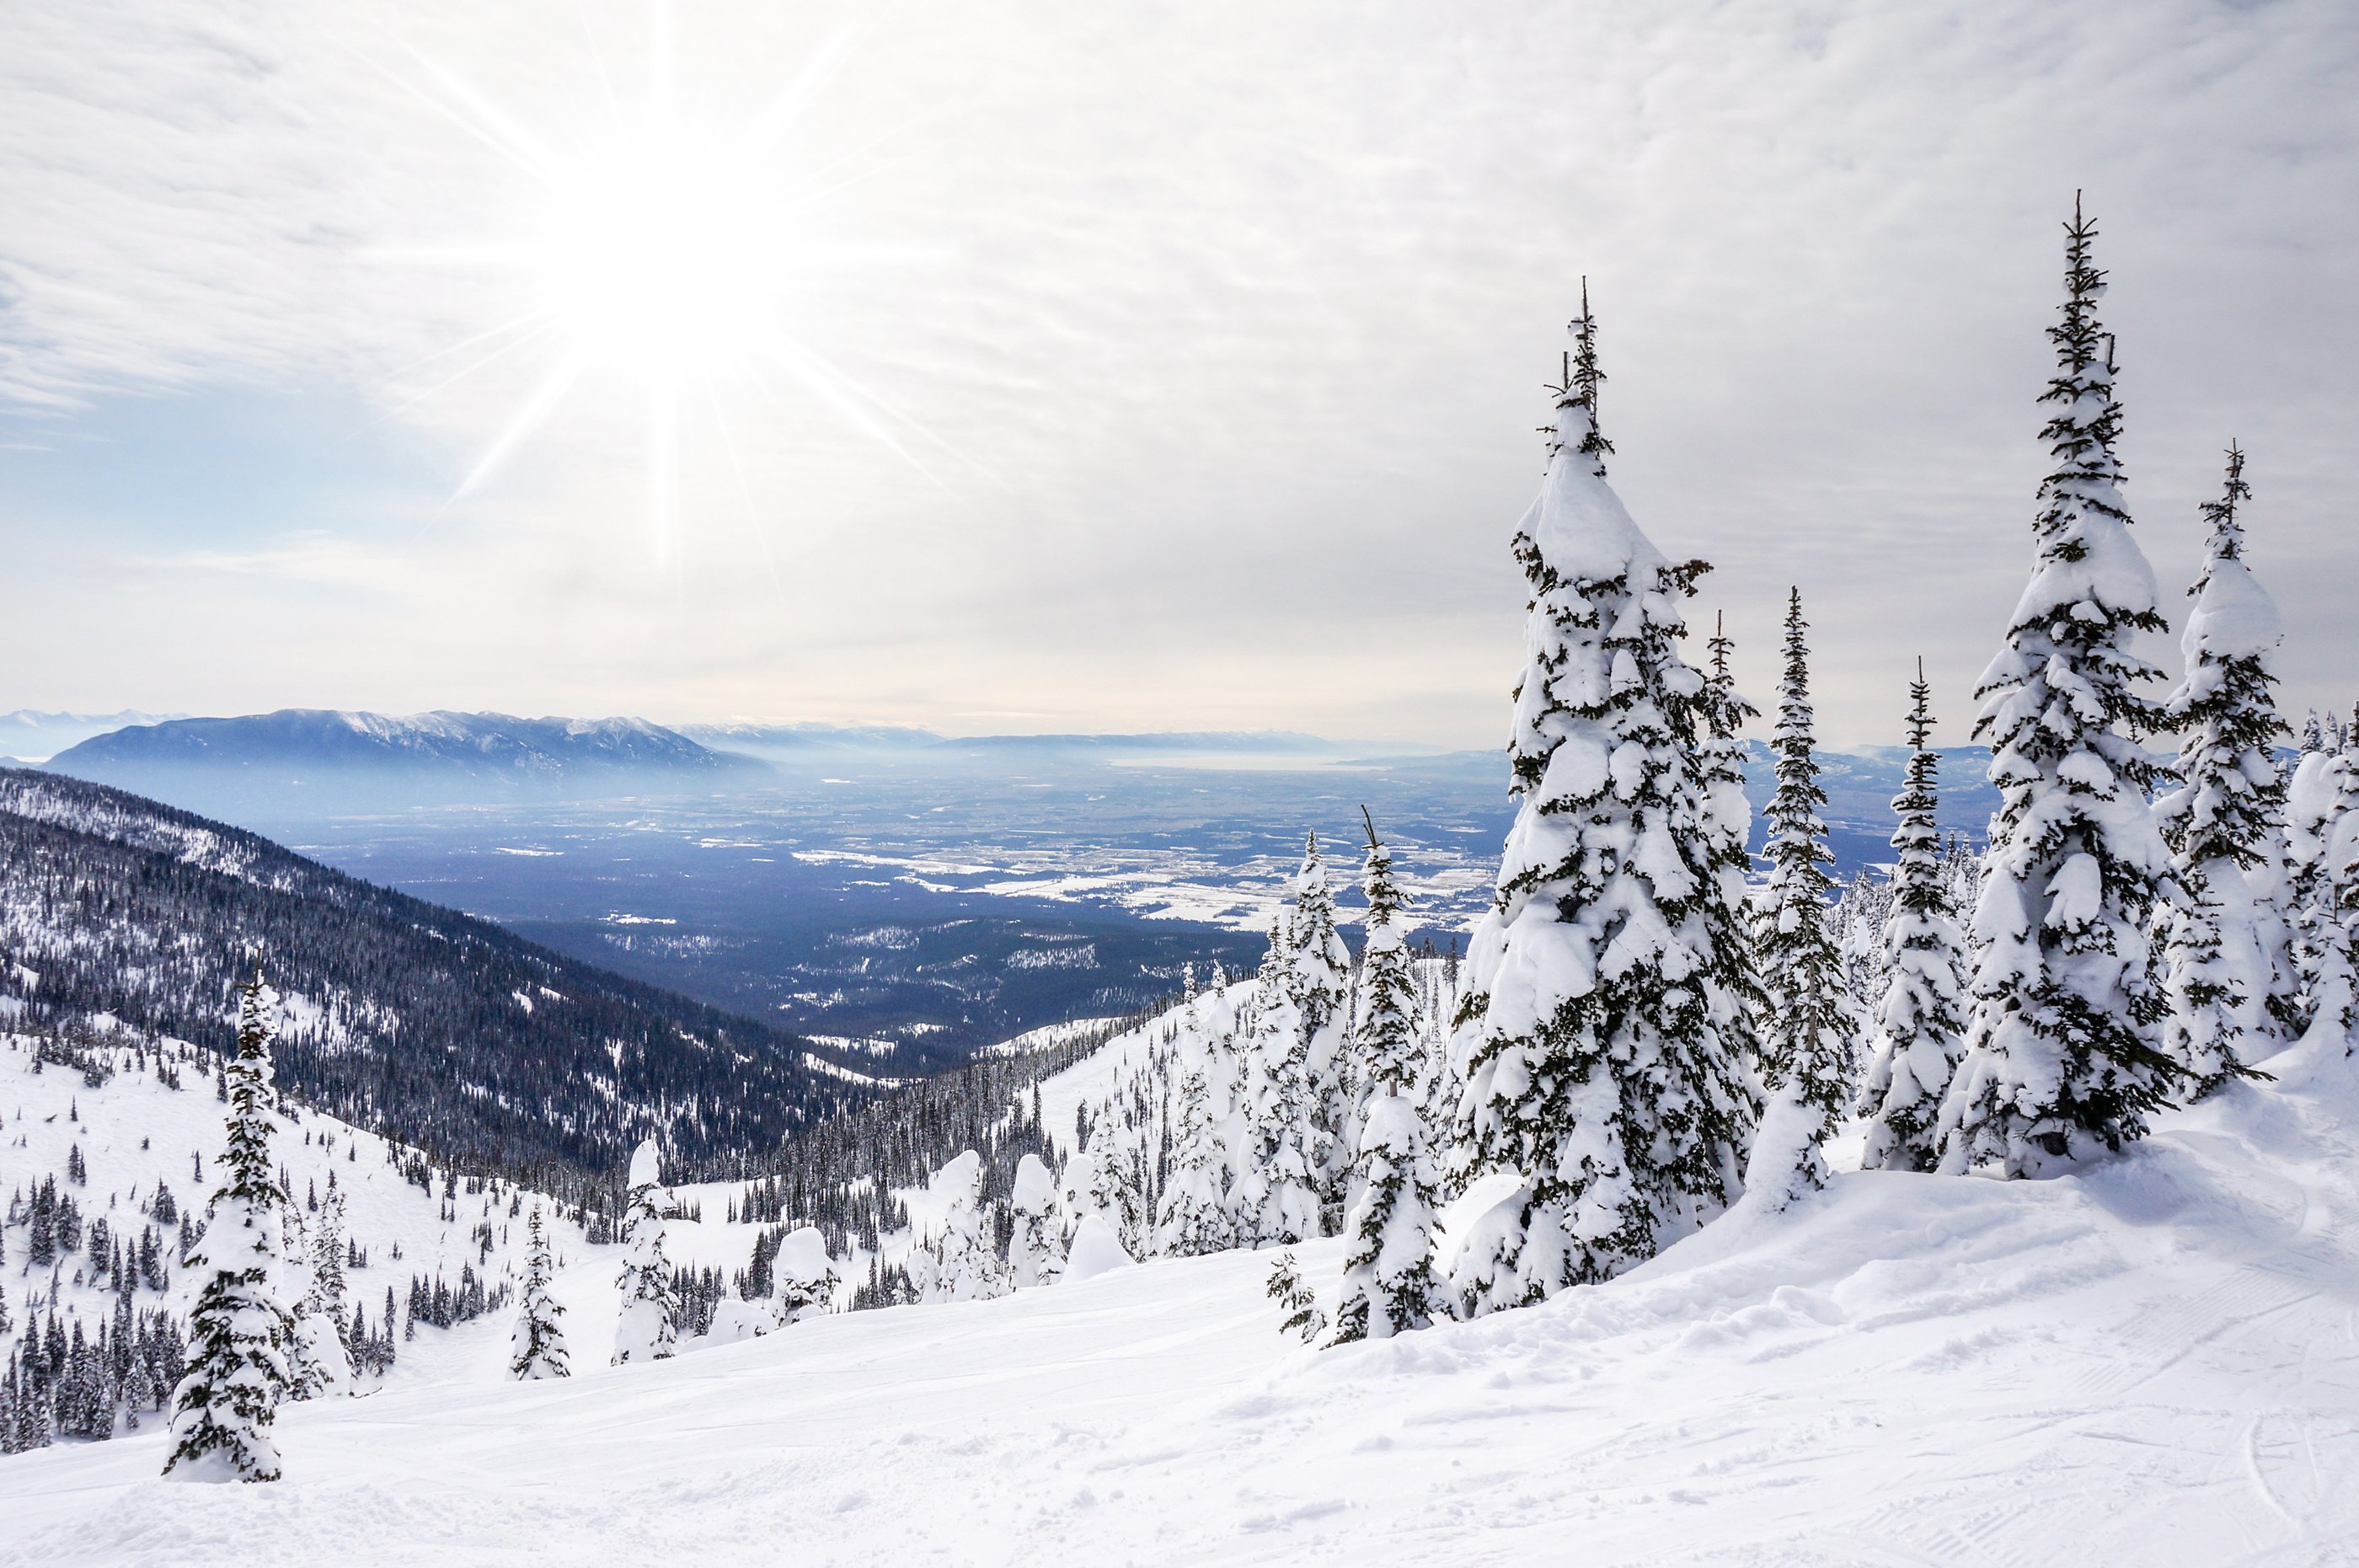 View from the top of Big Mountain at Whitefish Mountain Ski Resort